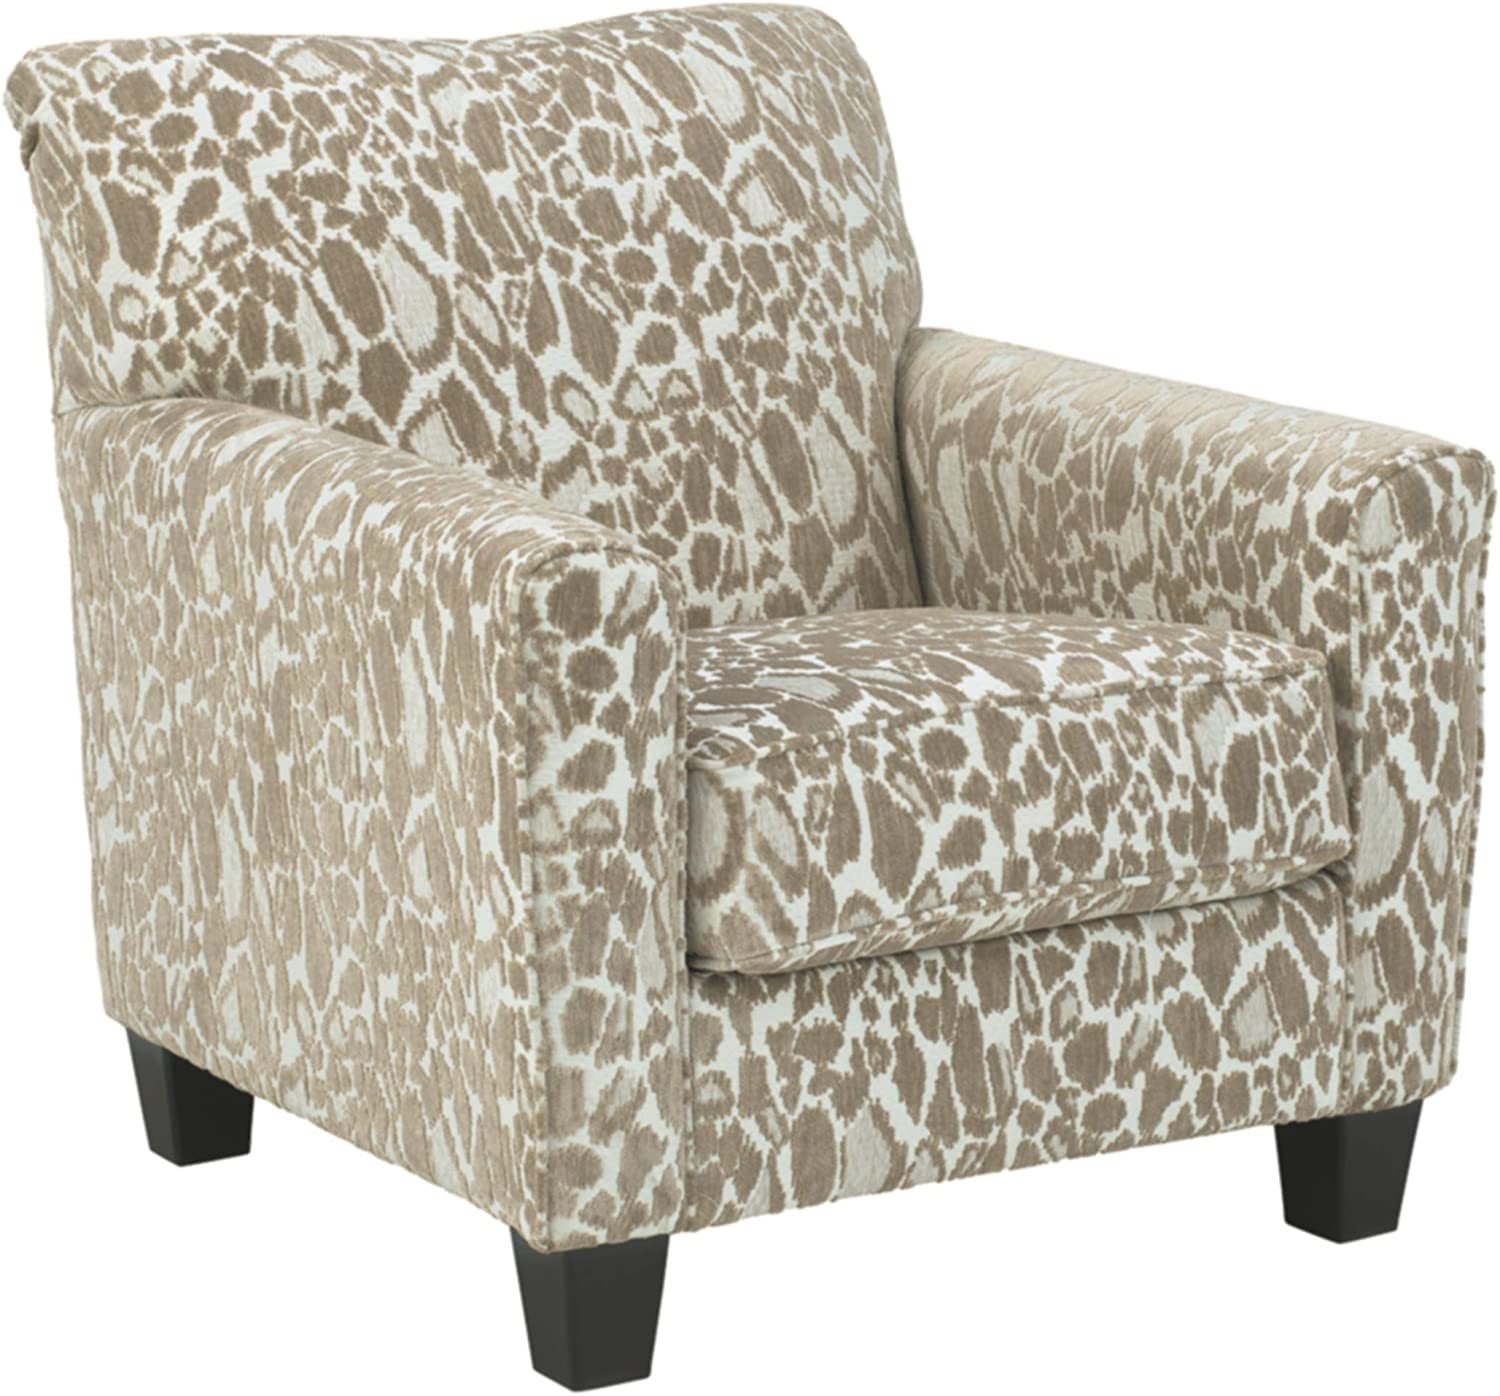 Signature Design by Ashley Dovemont Animal Printed Accent Chair, Beige - $637.99